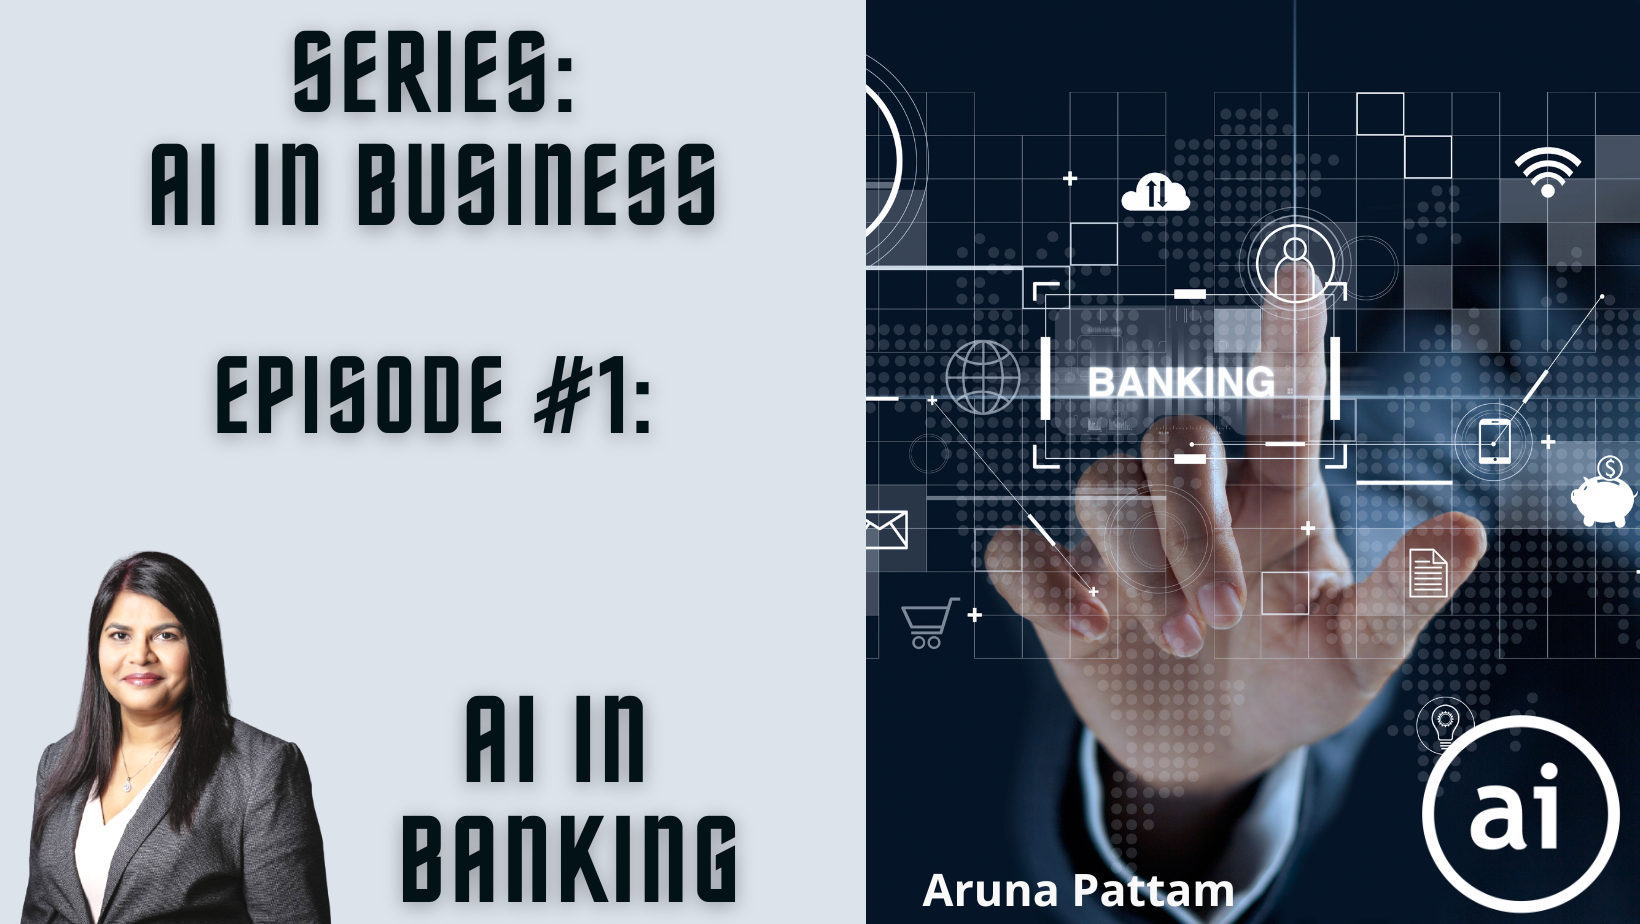 AI in Business Series:  Episode #1. AI in Banking